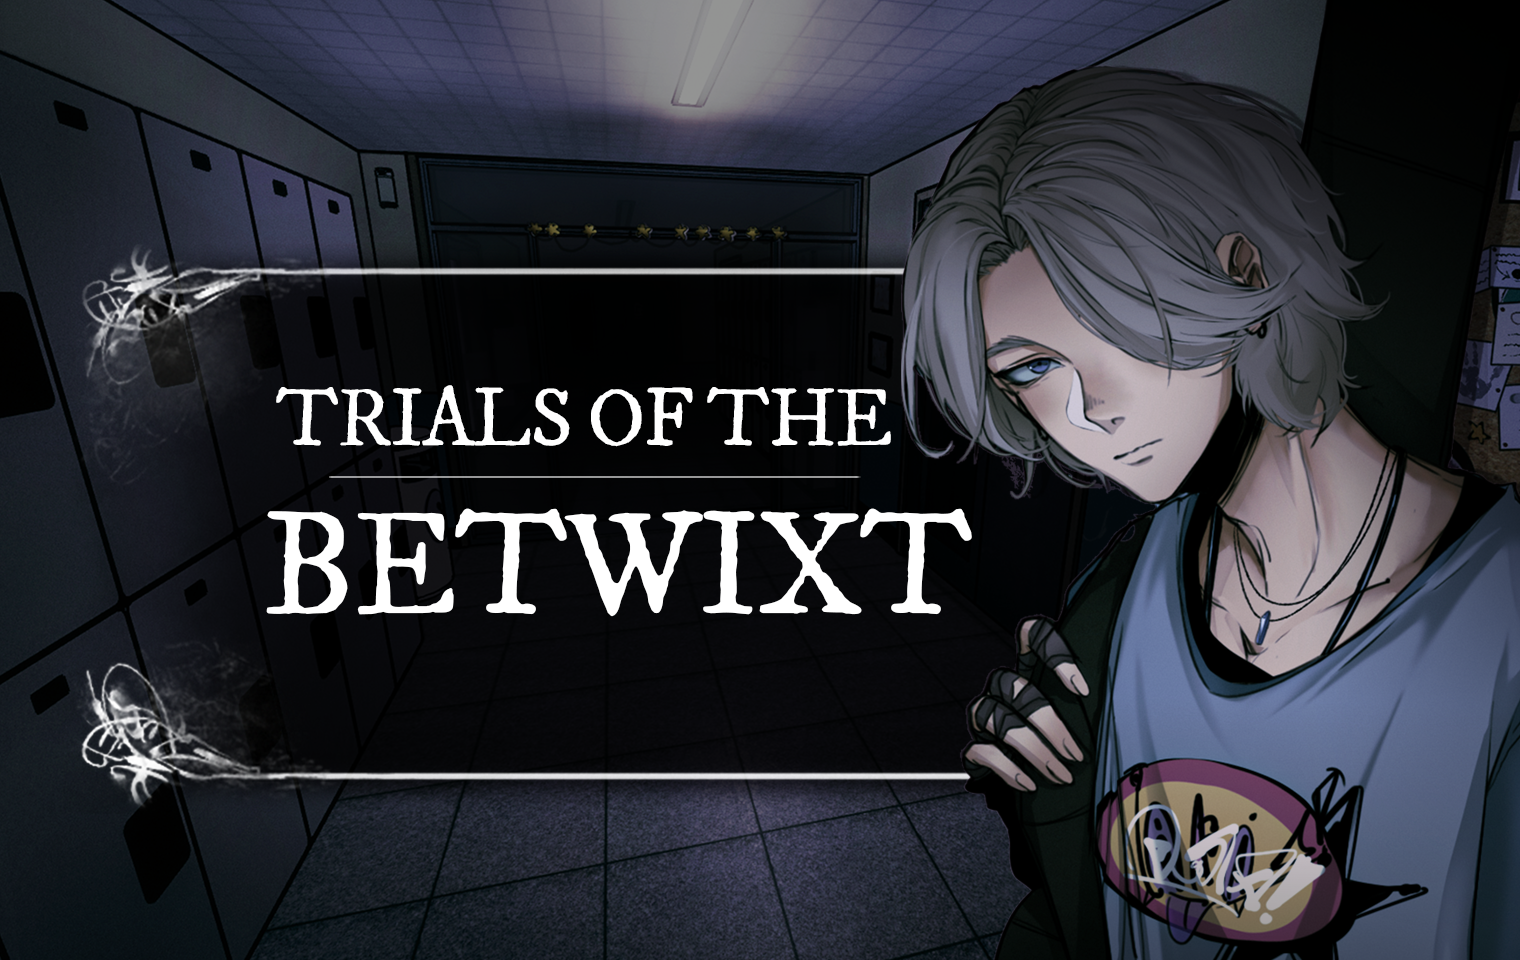 Trials of the Betwixt